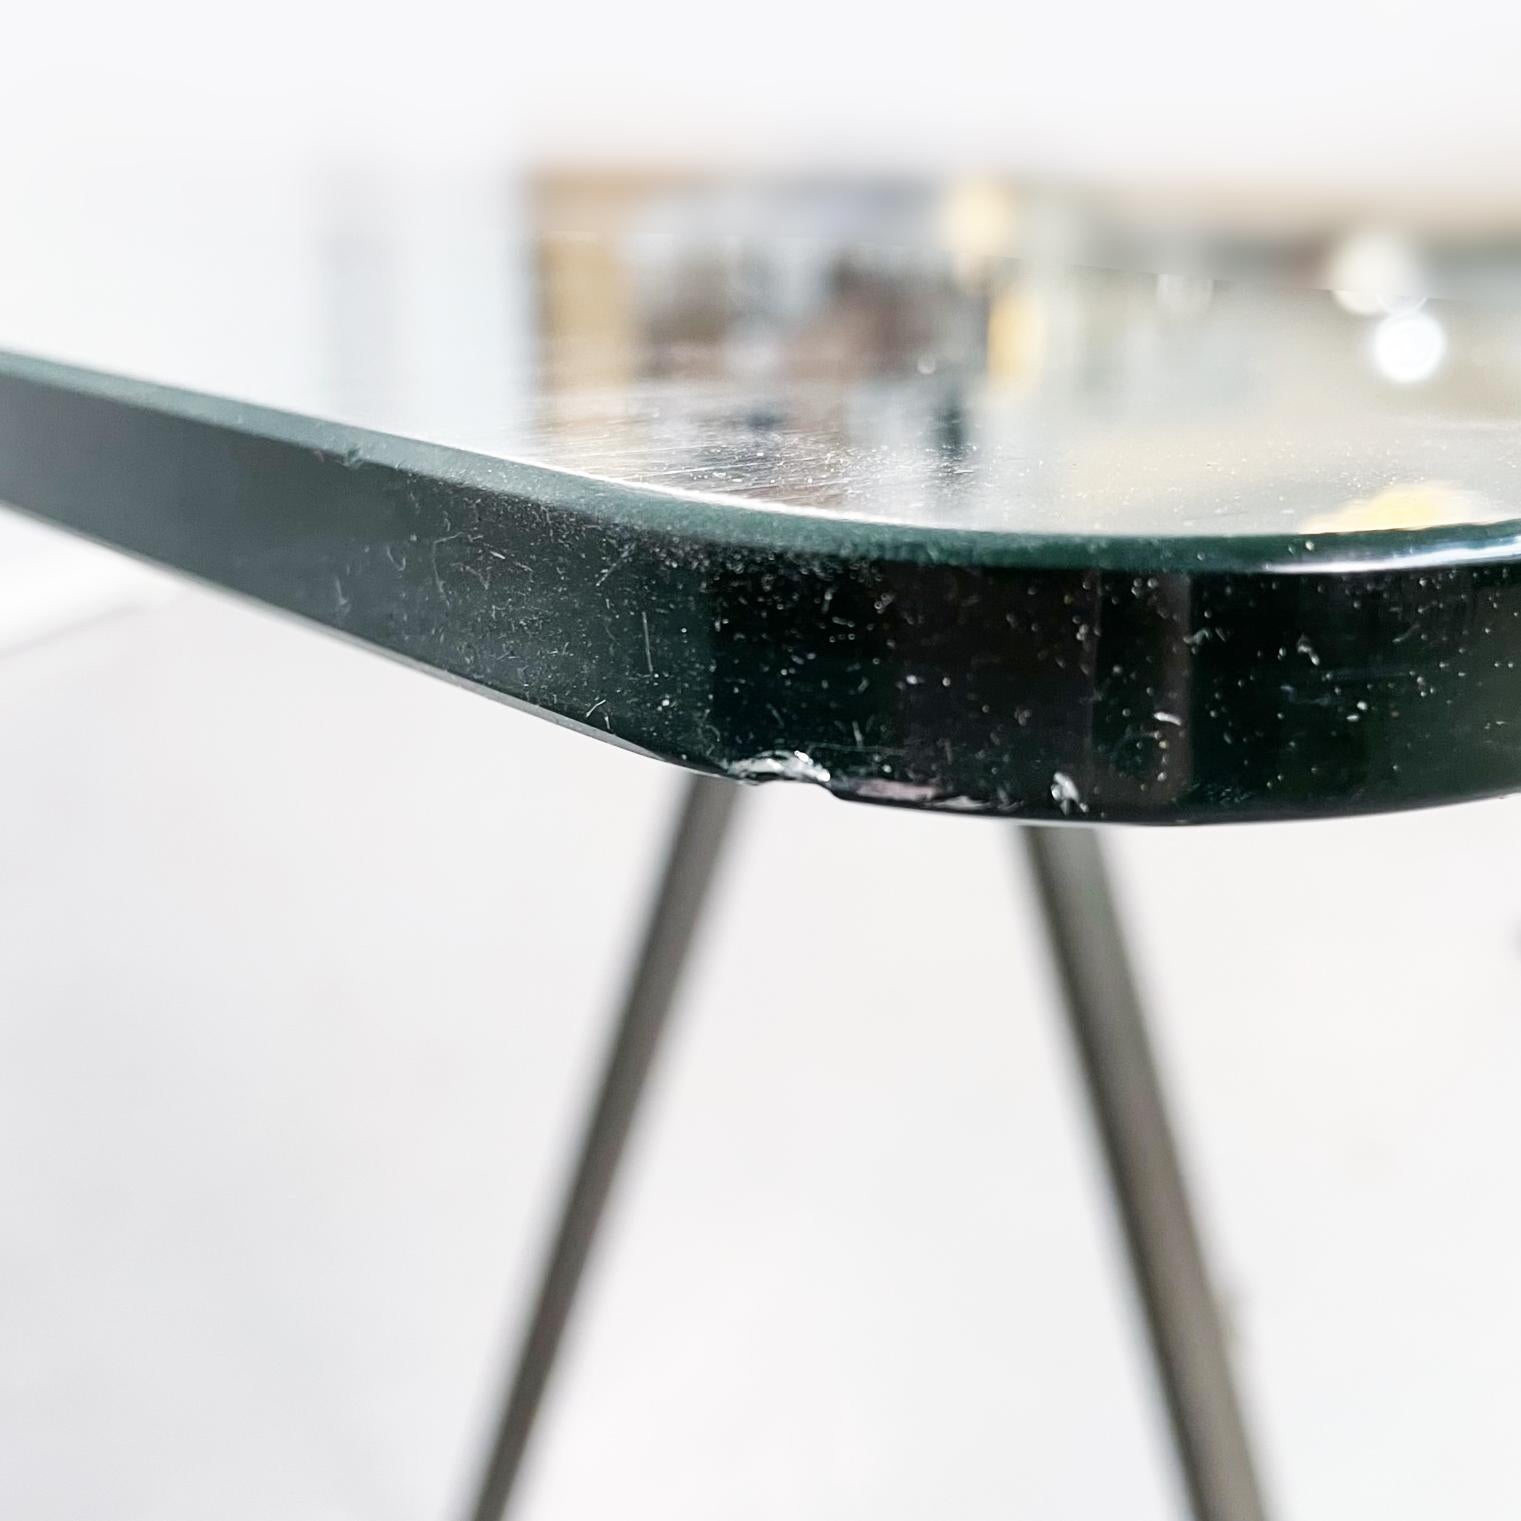 Italian Modern Glass Wood Steel Dining Table Frate by Enzo Mari for Driade, 1973 For Sale 3